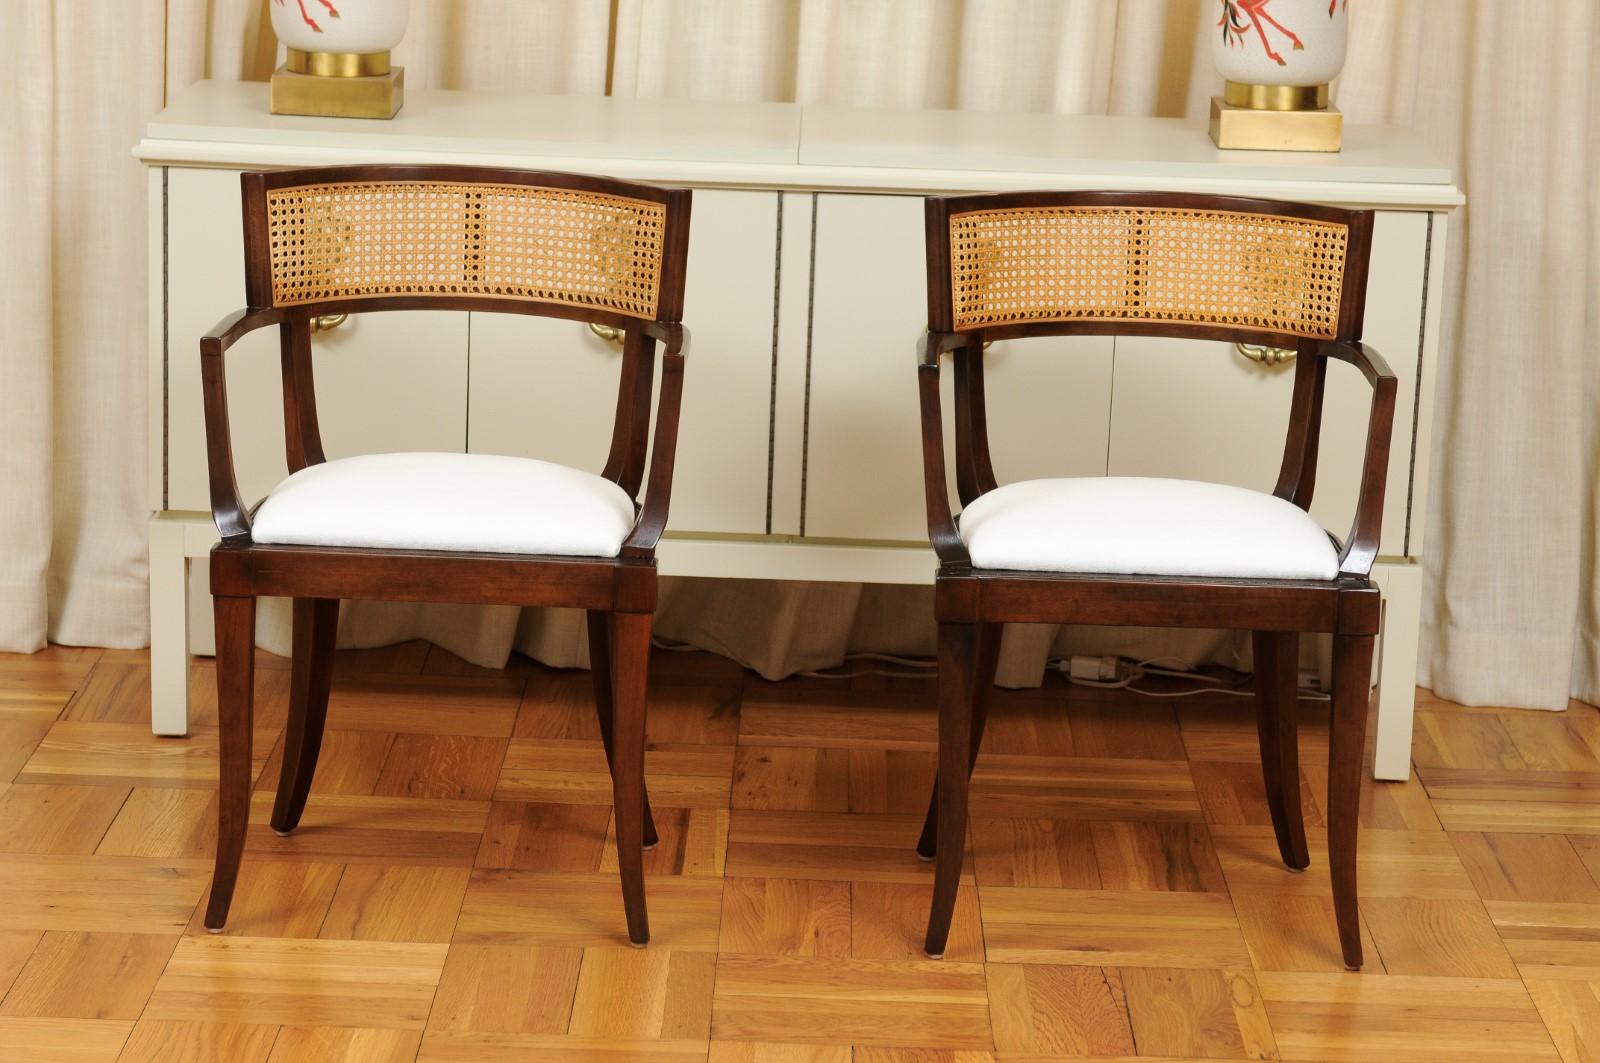 All Arms, Exquisite Set of 20 Klismos Cane Dining Chairs by Baker, circa 1958 For Sale 7